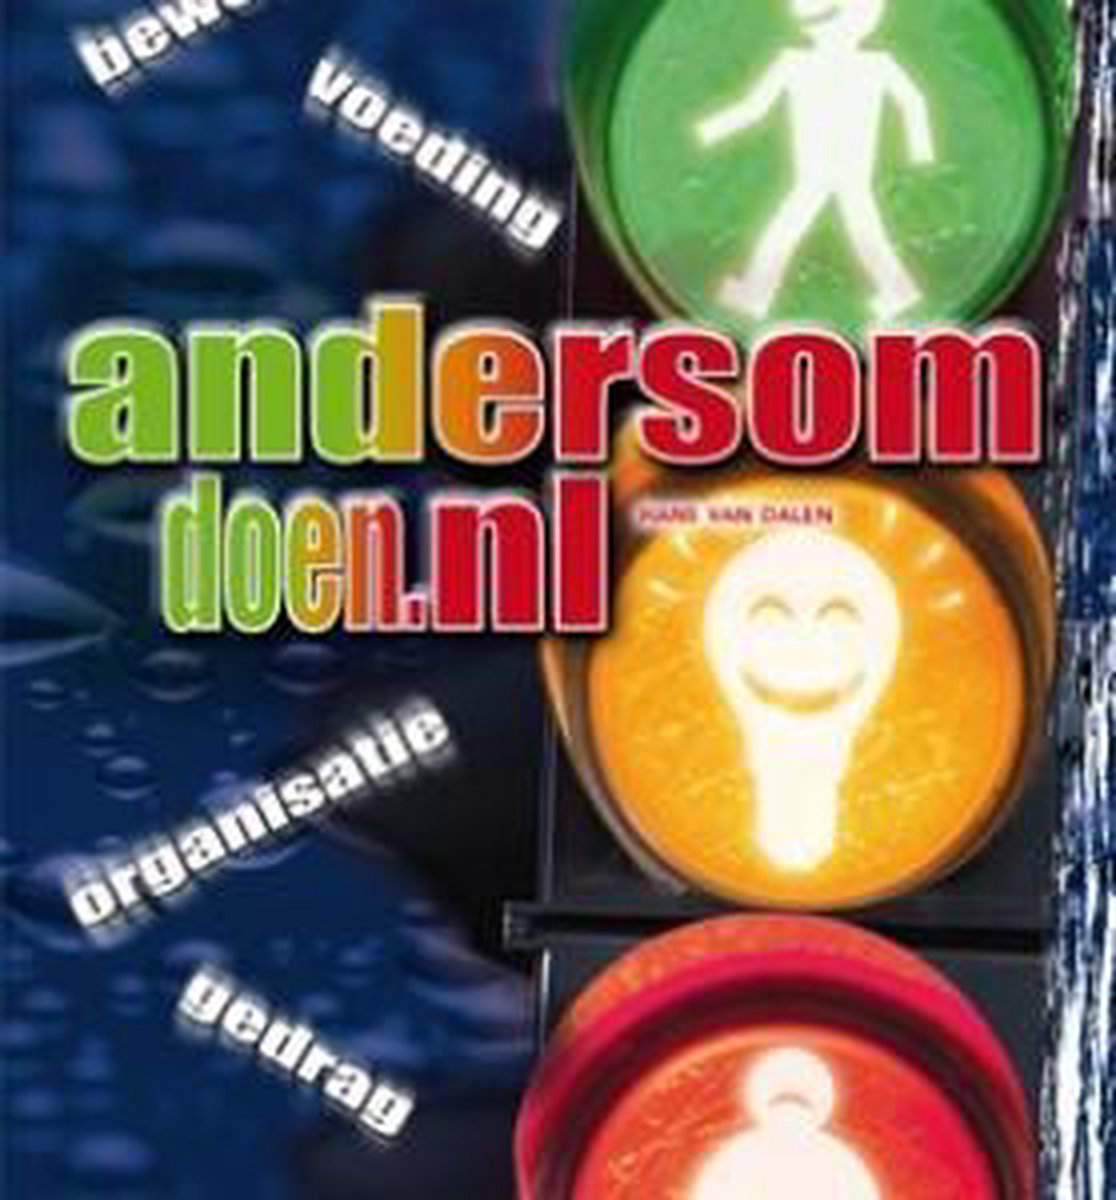 Andersom